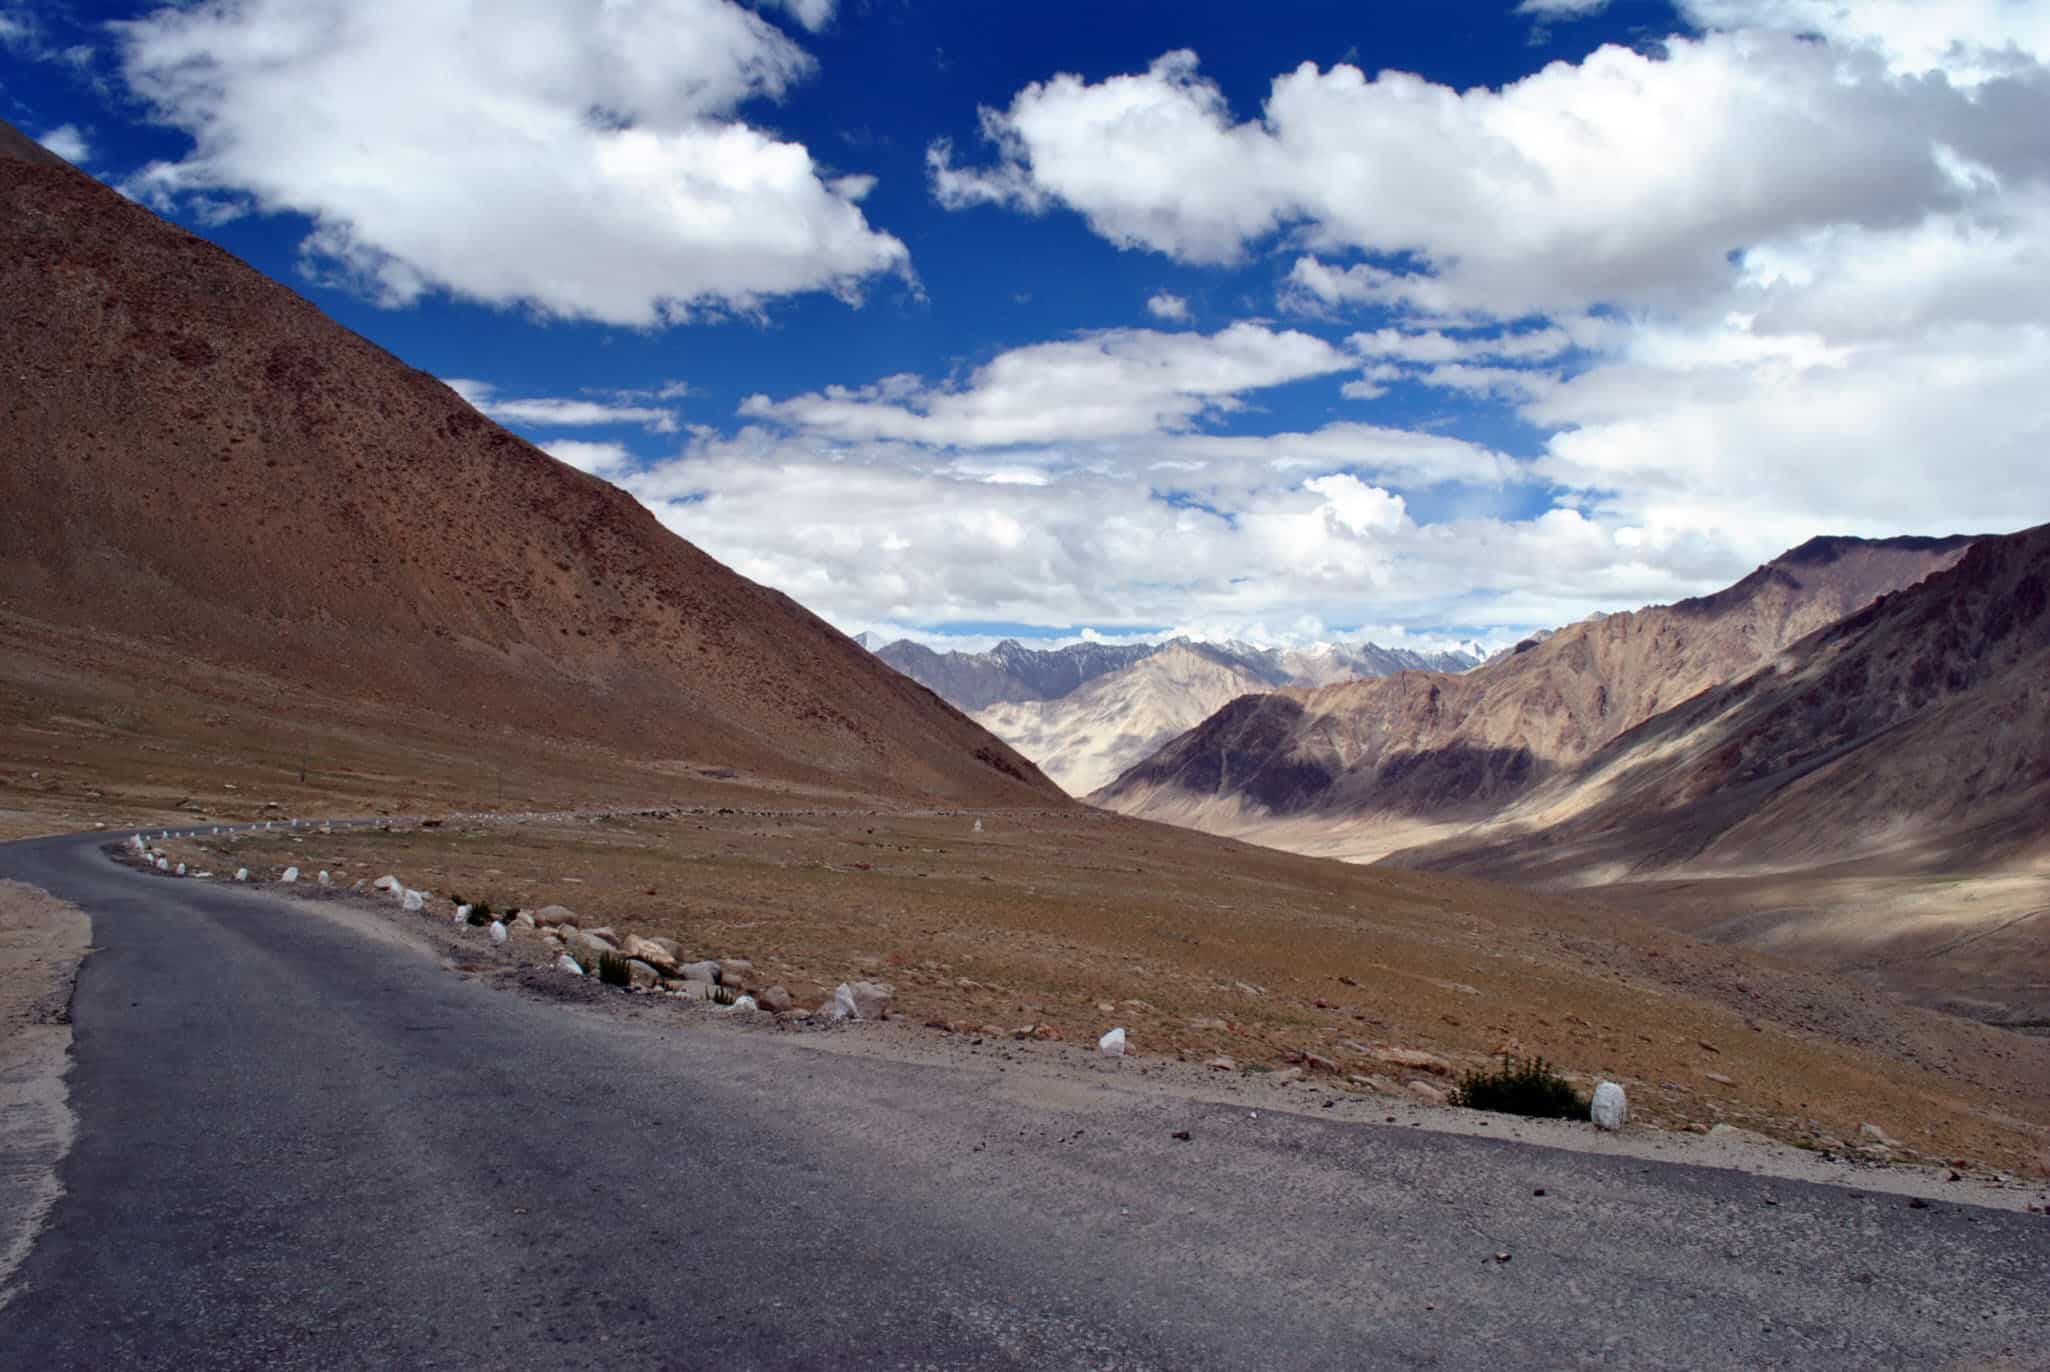 As you descend into Nubra Valley from Leh